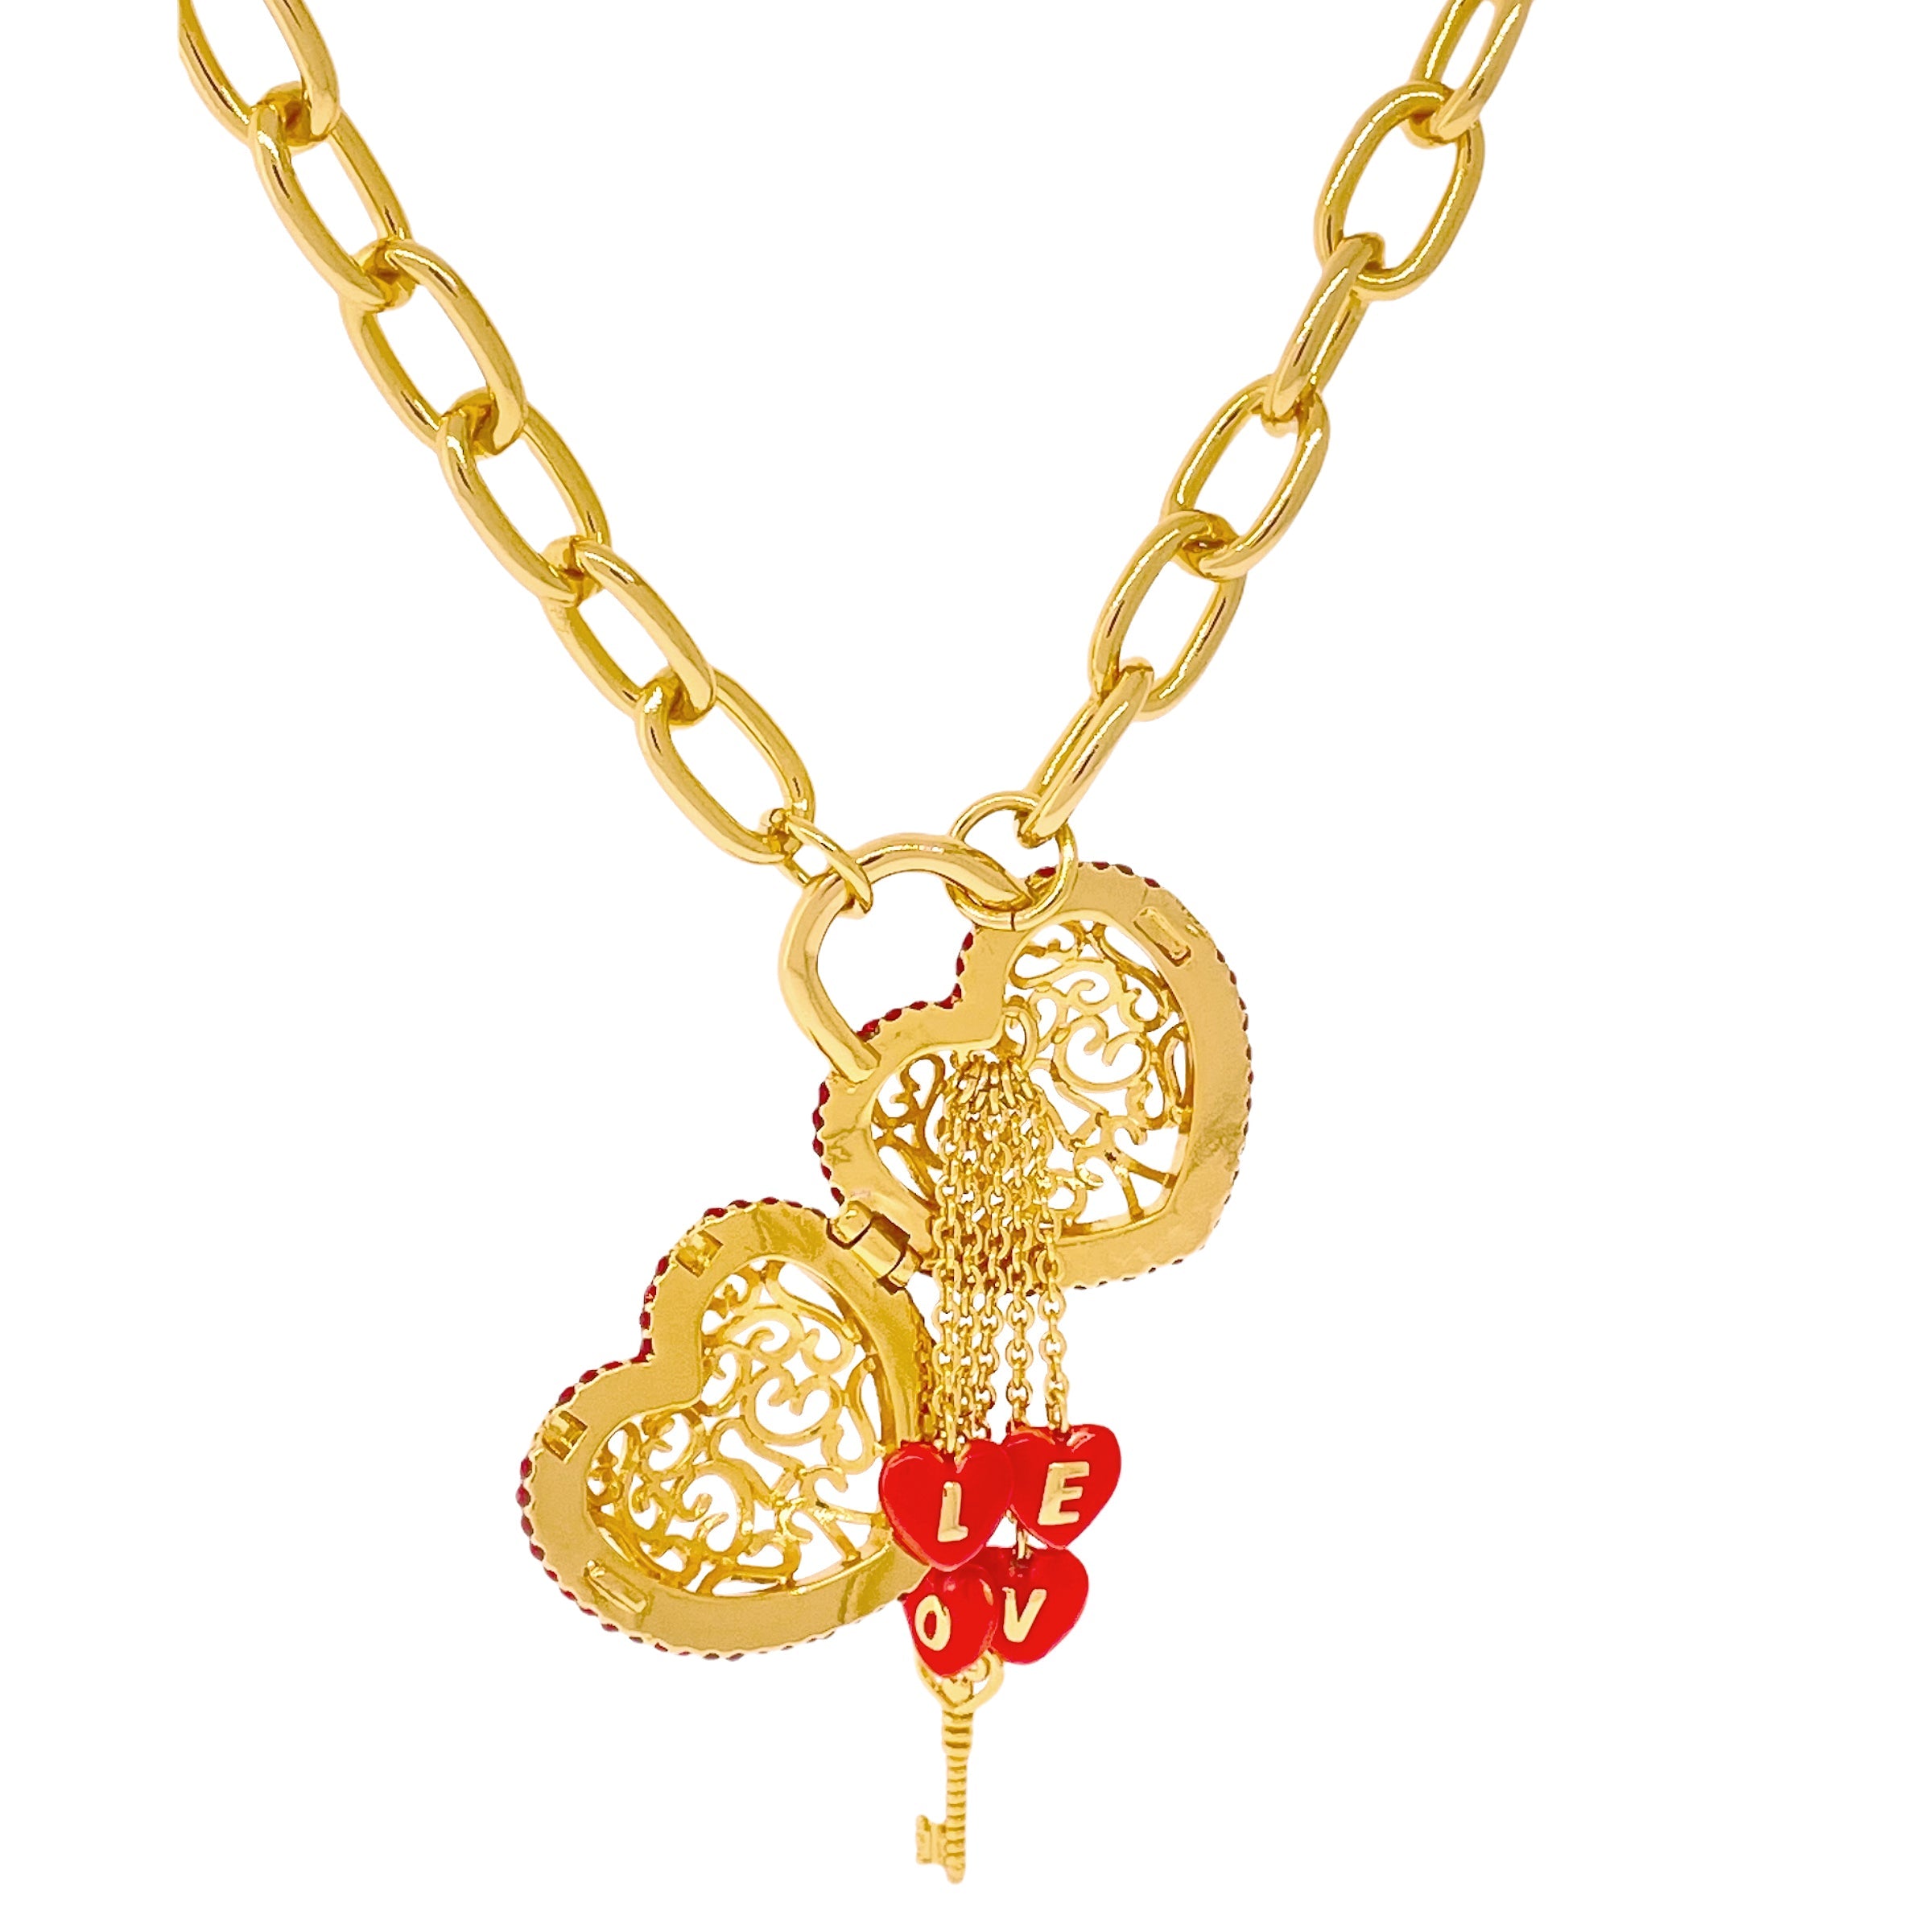 Ritzy Couture DeLuxe Locket Full of Love Necklace